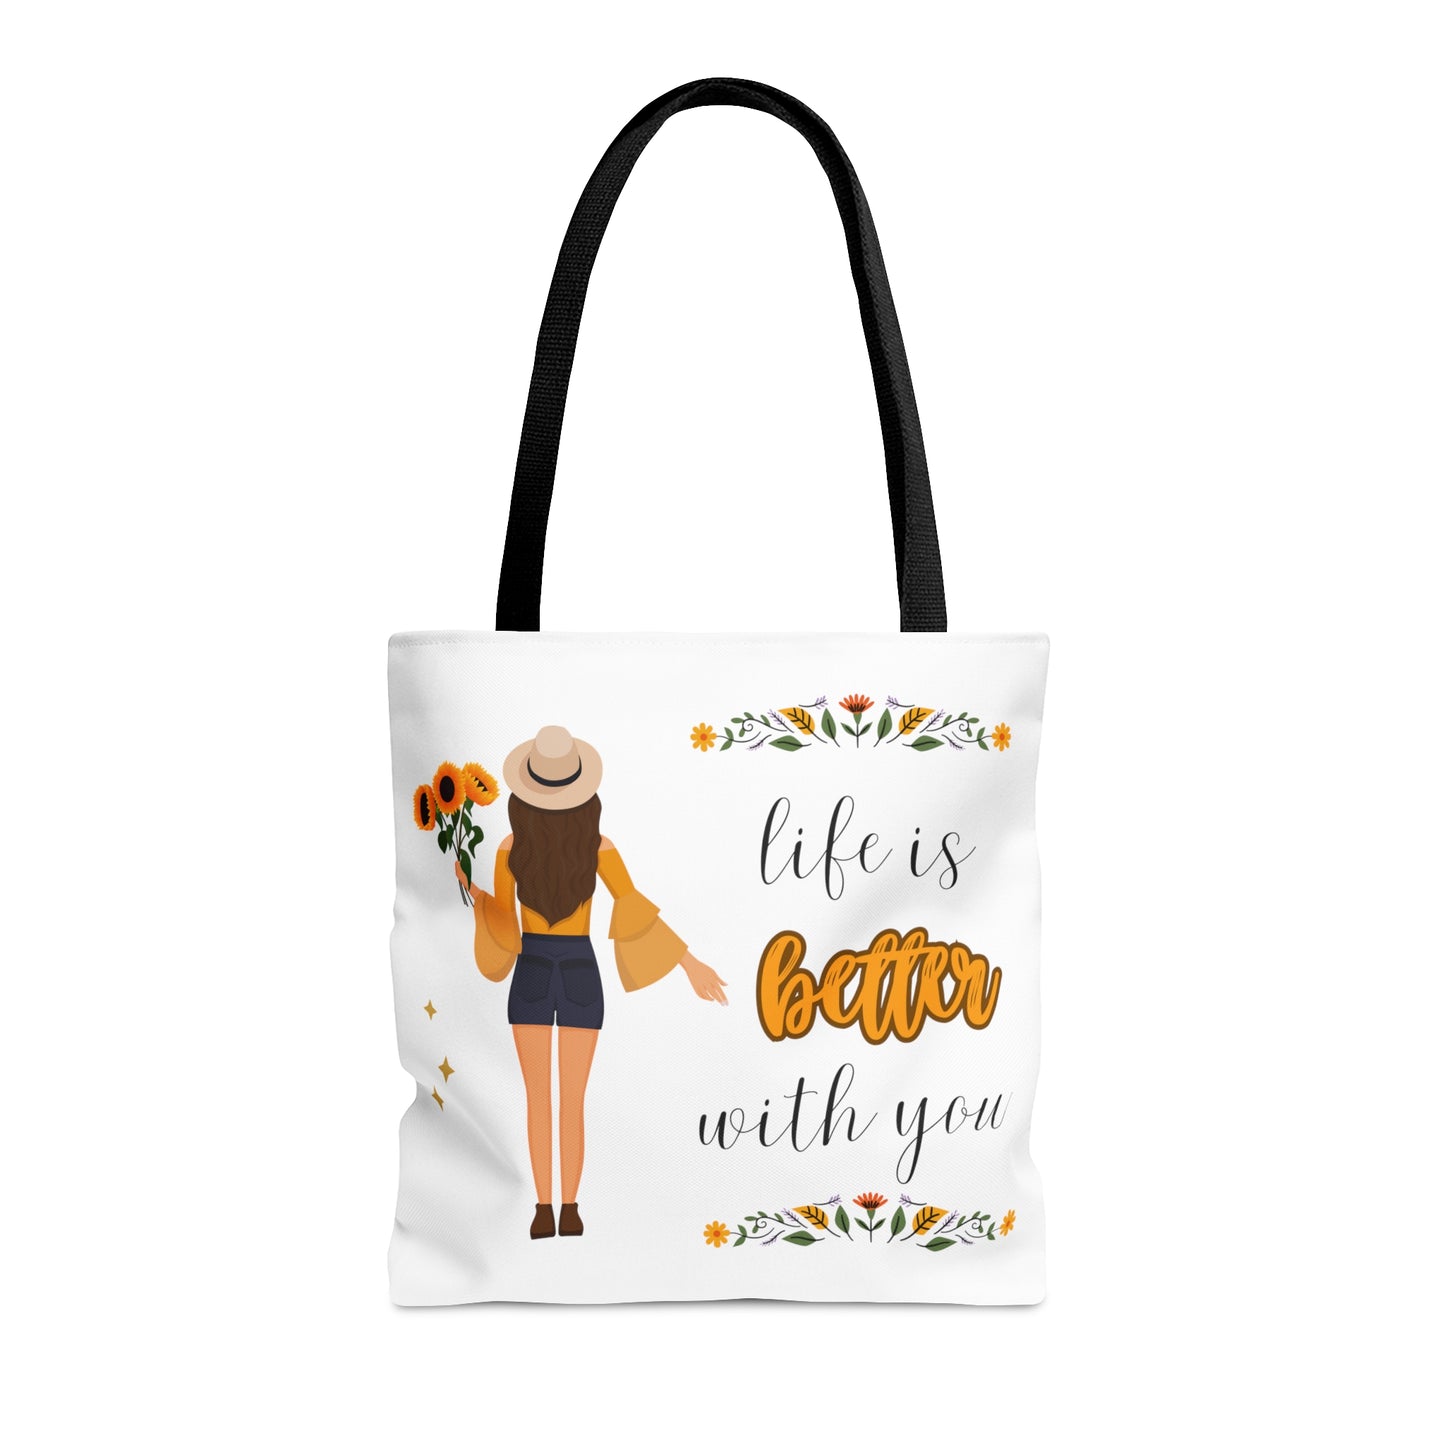 Tote Bag - Love and freedom - 09